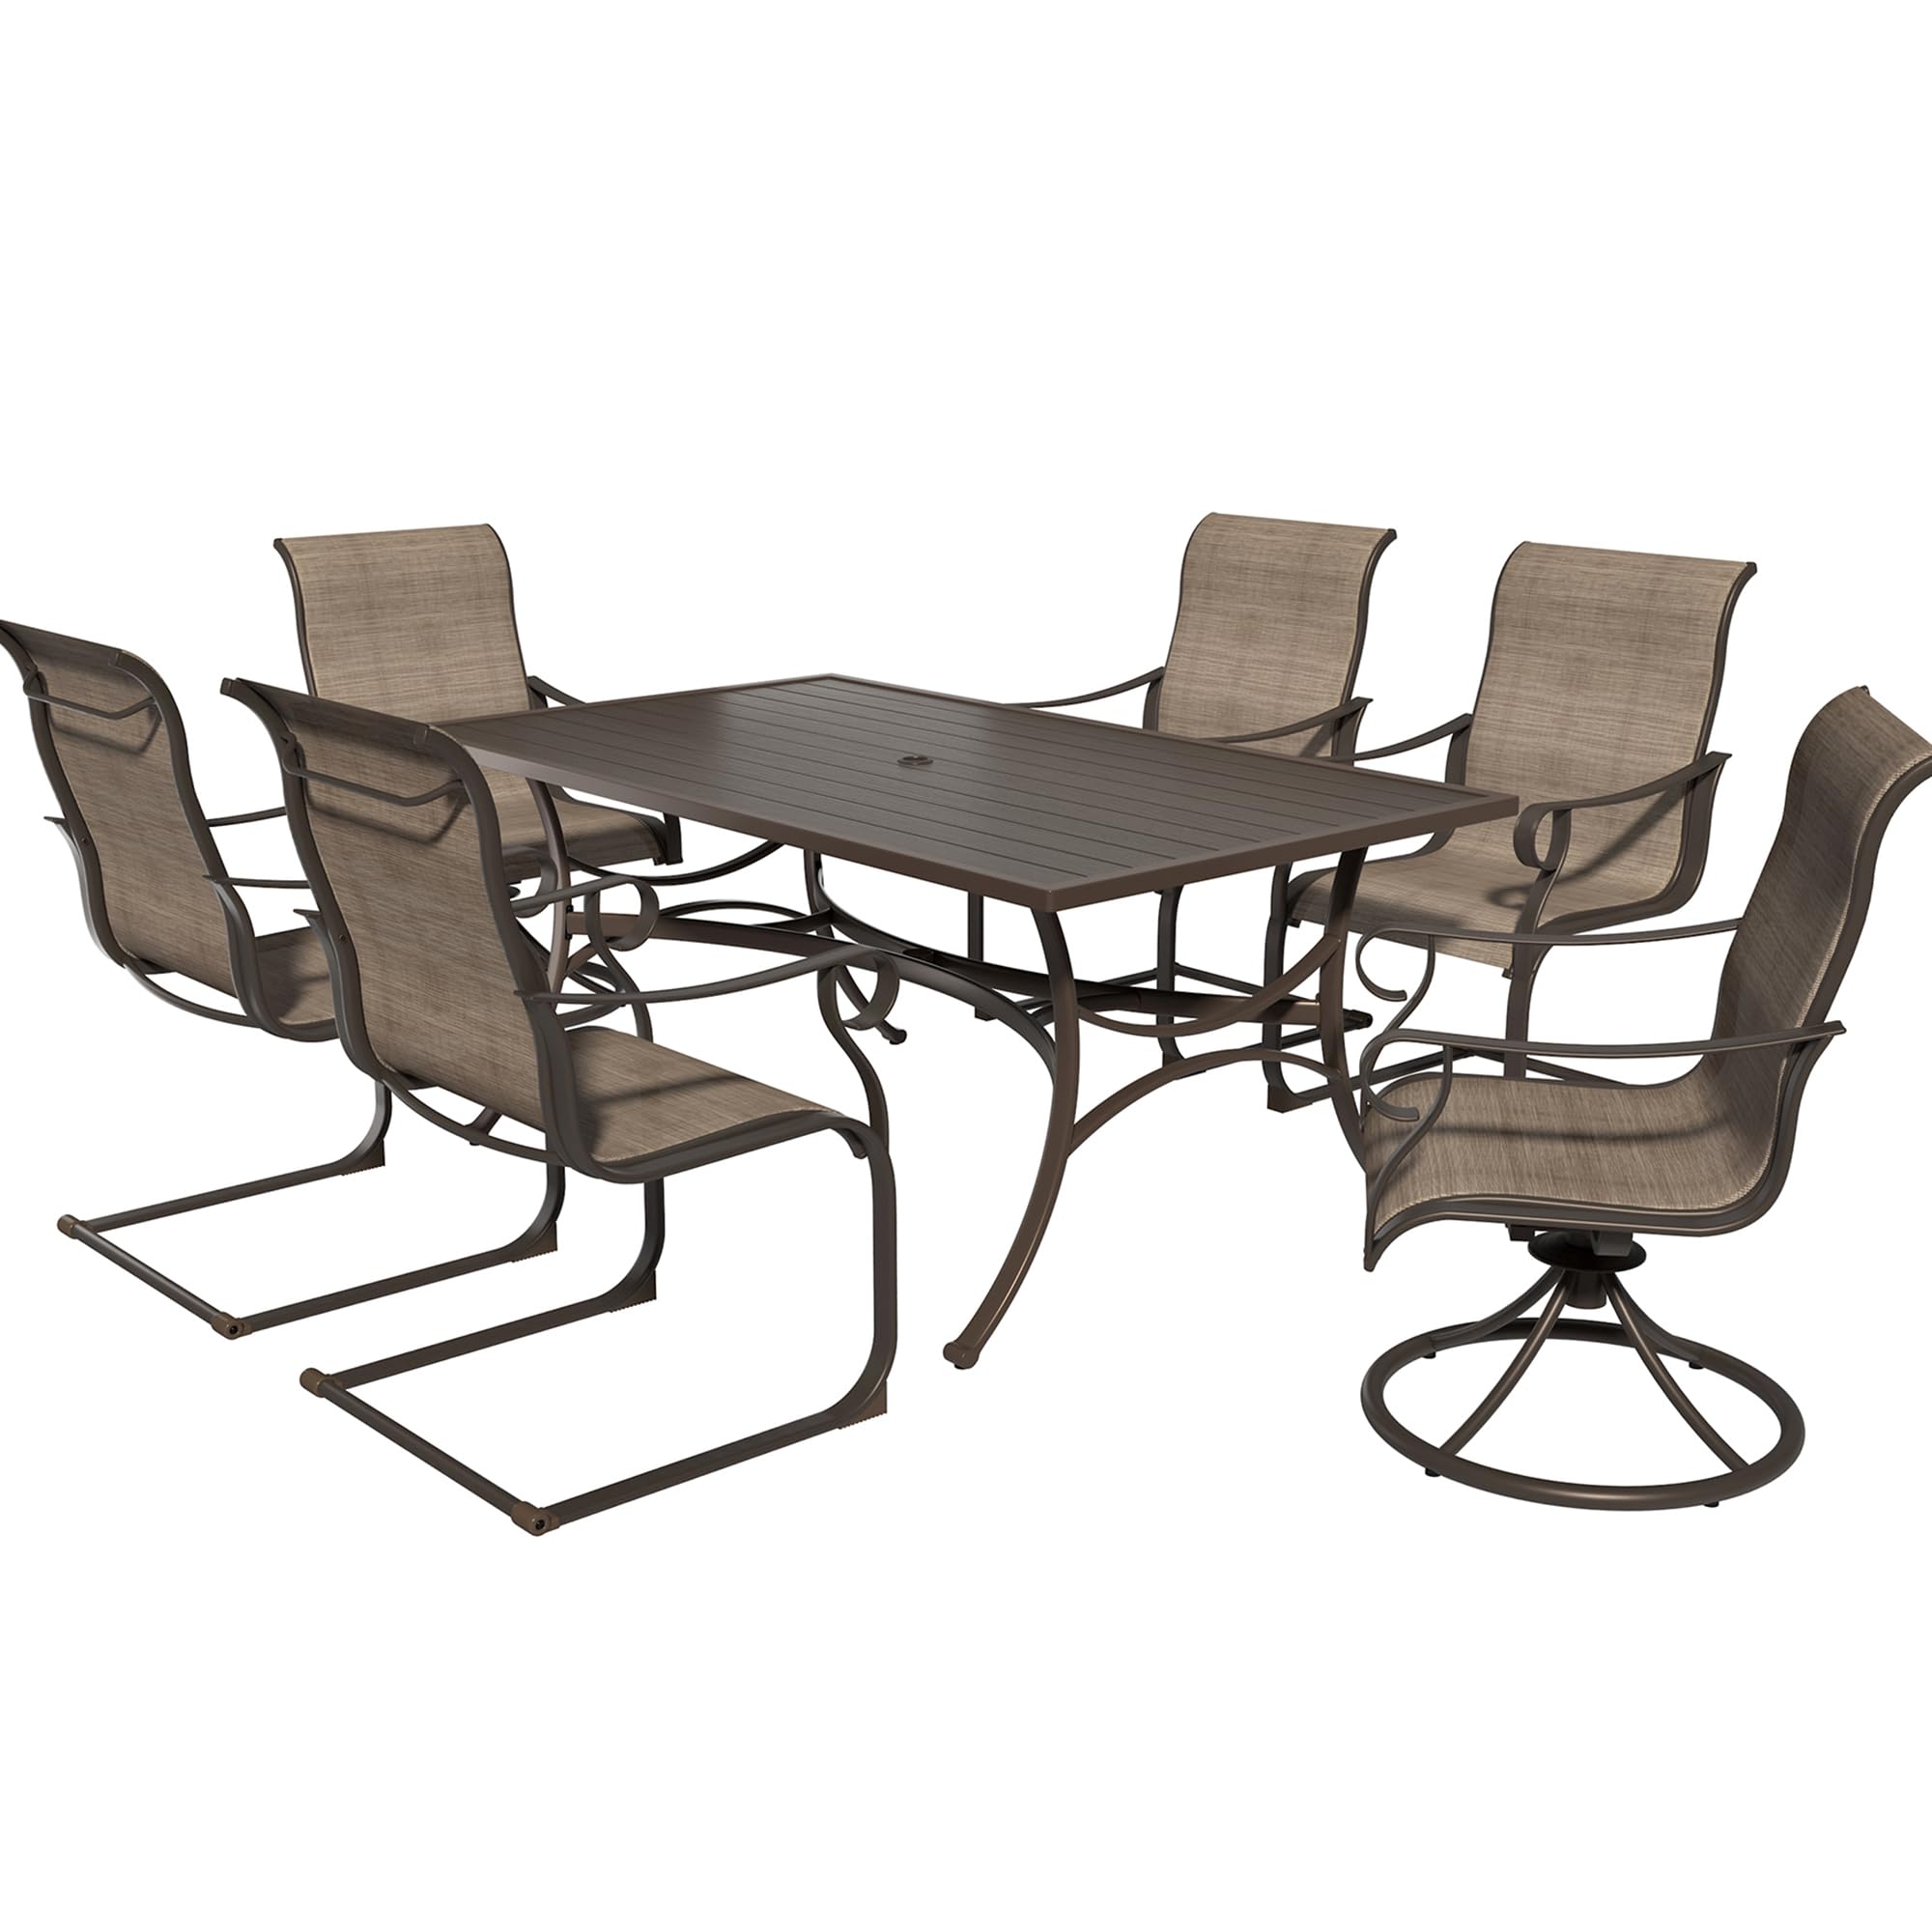 Outdoor Dining Set for 7pcs with 66" Metal Large Patio Table and Chairs Set Swivel Rocking Patio Chairs Rectangle Outdoor Dining Table with Umbrella Hole Patio Furniture Sets for Yard, Garden, Porch